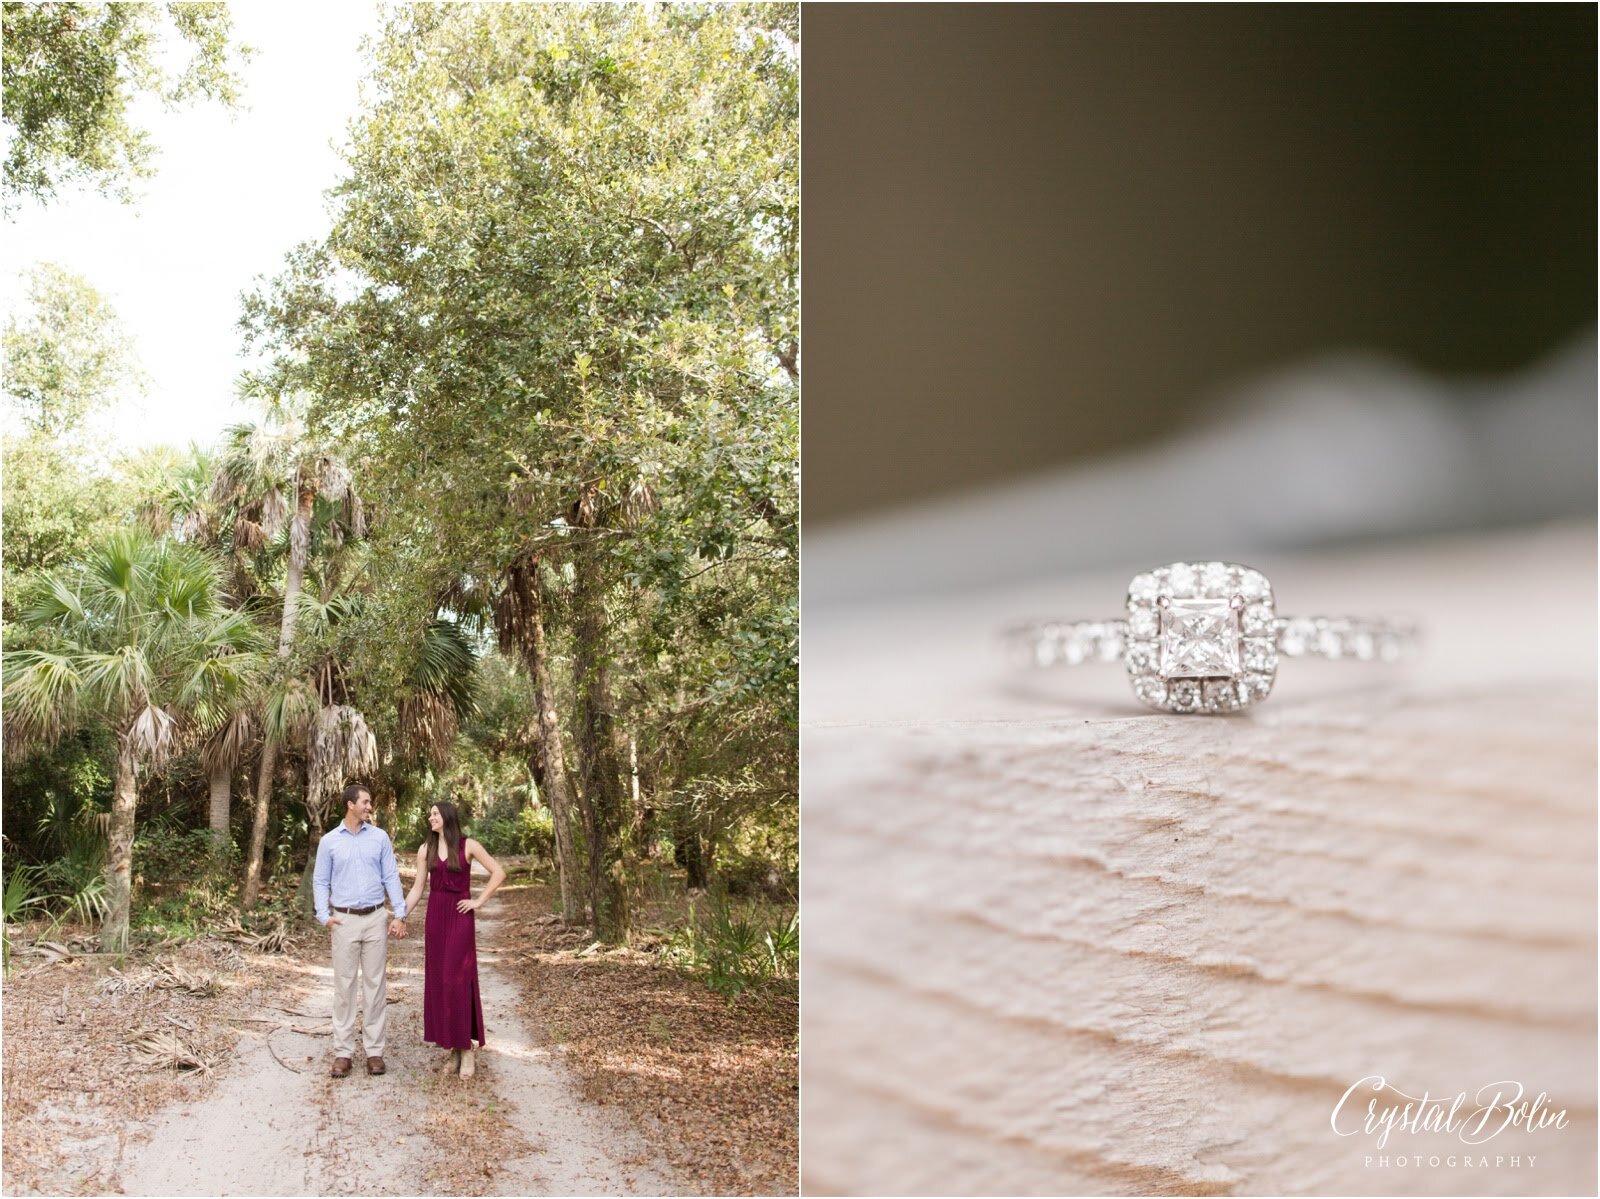 Marissa & Calvin's Engagement at Frenchman's Forest in Palm Beac